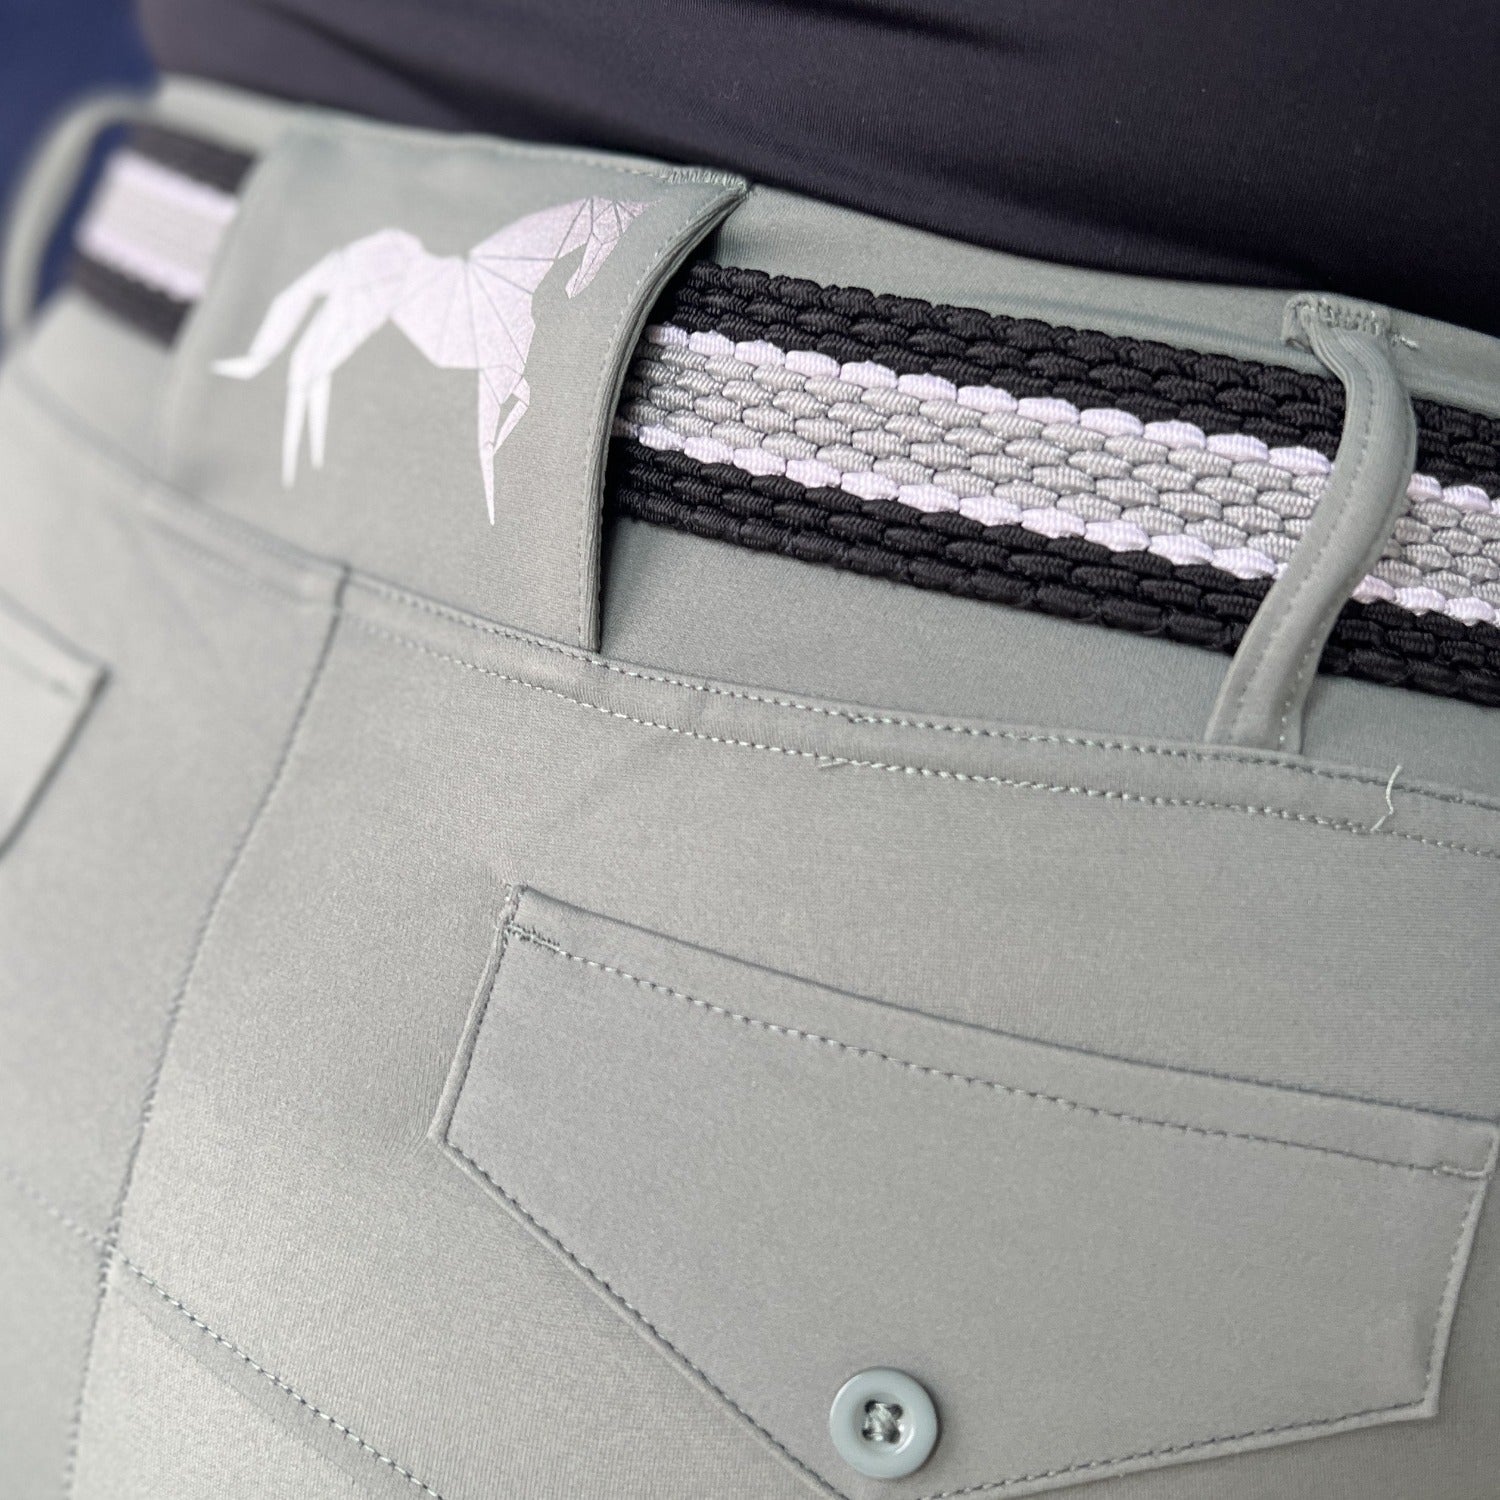 Close-up view of a person wearing light gray pants that have a buttoned back pocket, standing with their back facing the camera. The pants feature The Braided Belt from Pure Canter, showcasing a black and white geometric horse design emblem on the waistband, offering both style and a secure buckle.